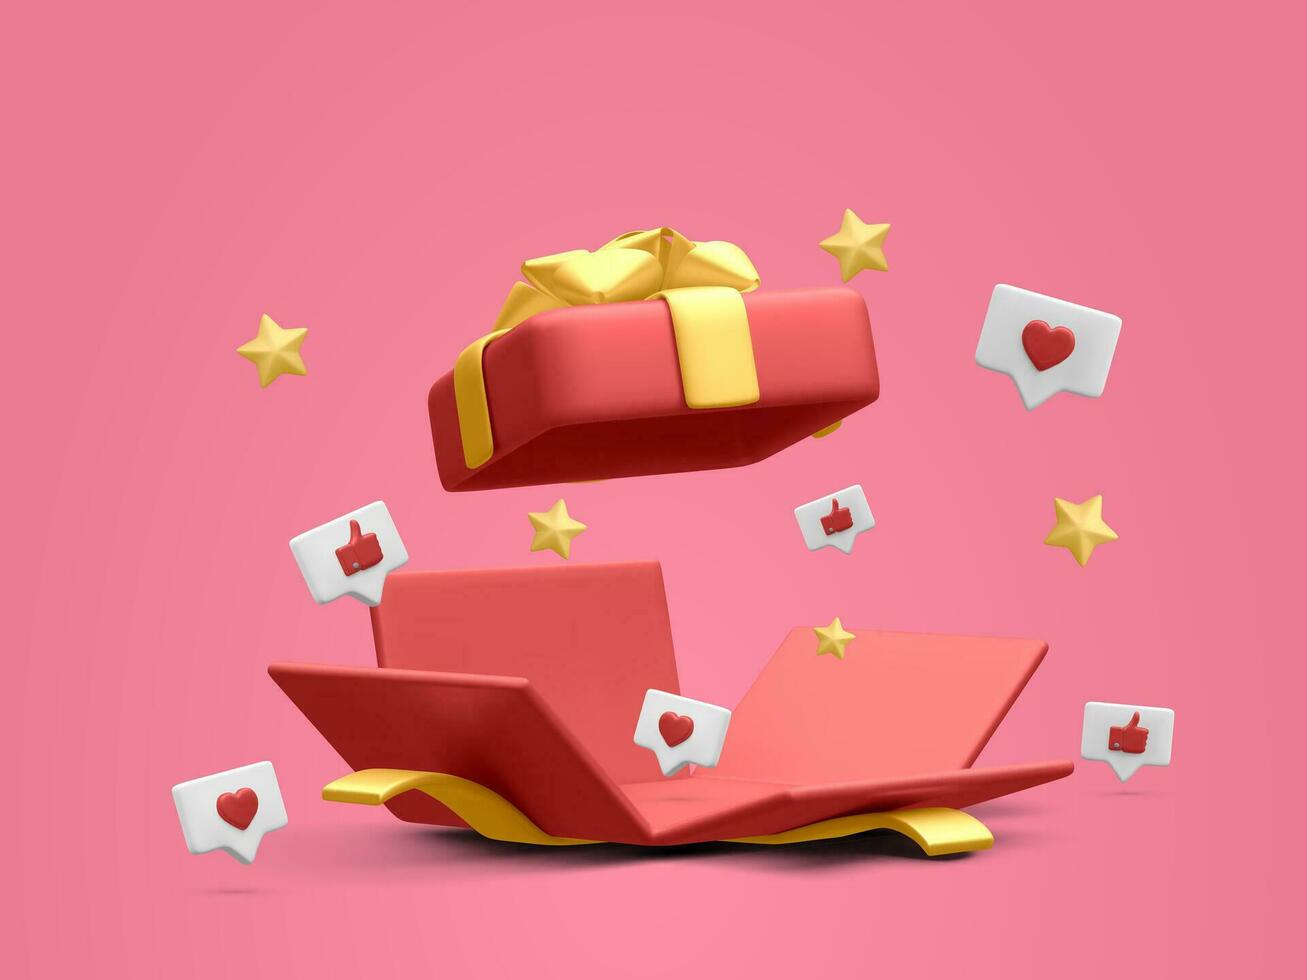 3d realistic open gift box with thumbs up, hearts and stars. Vector illustration